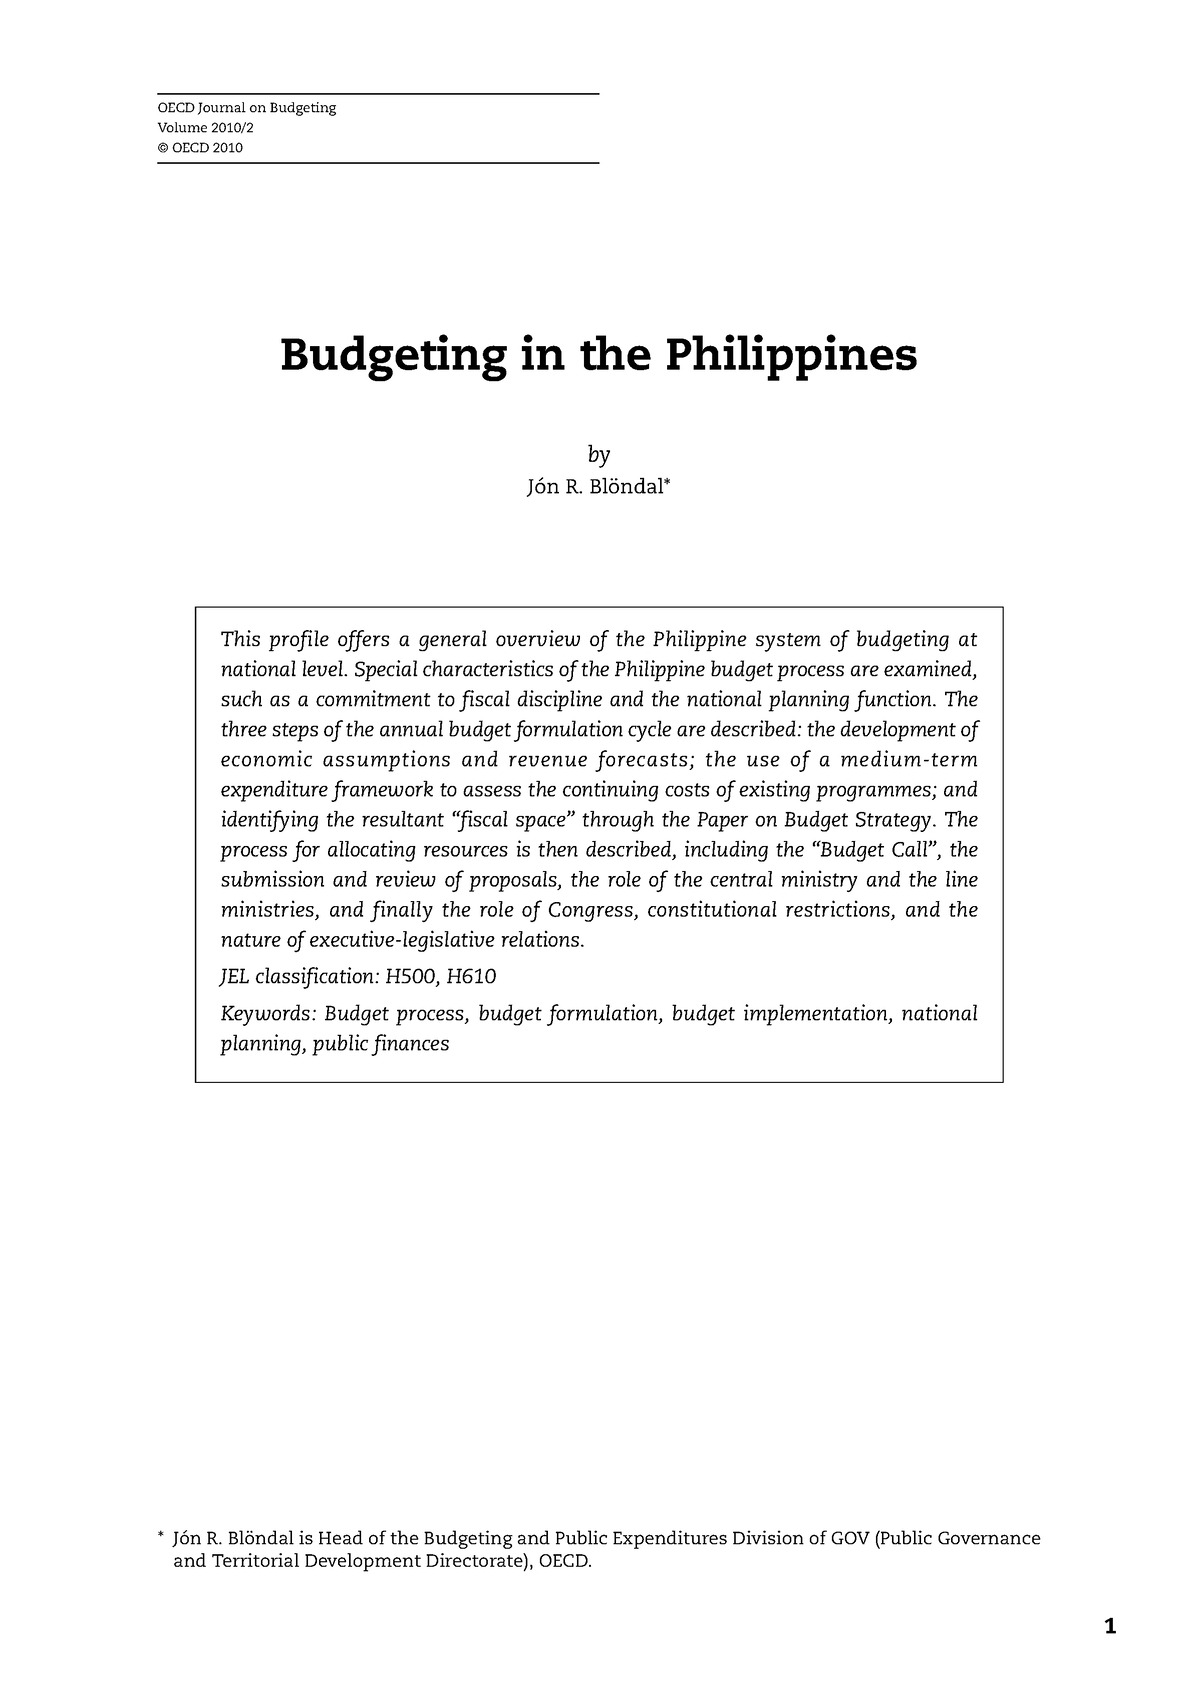 Budgeting in the Philippines - OECD Journal on Budgeting Volume 2010 ...